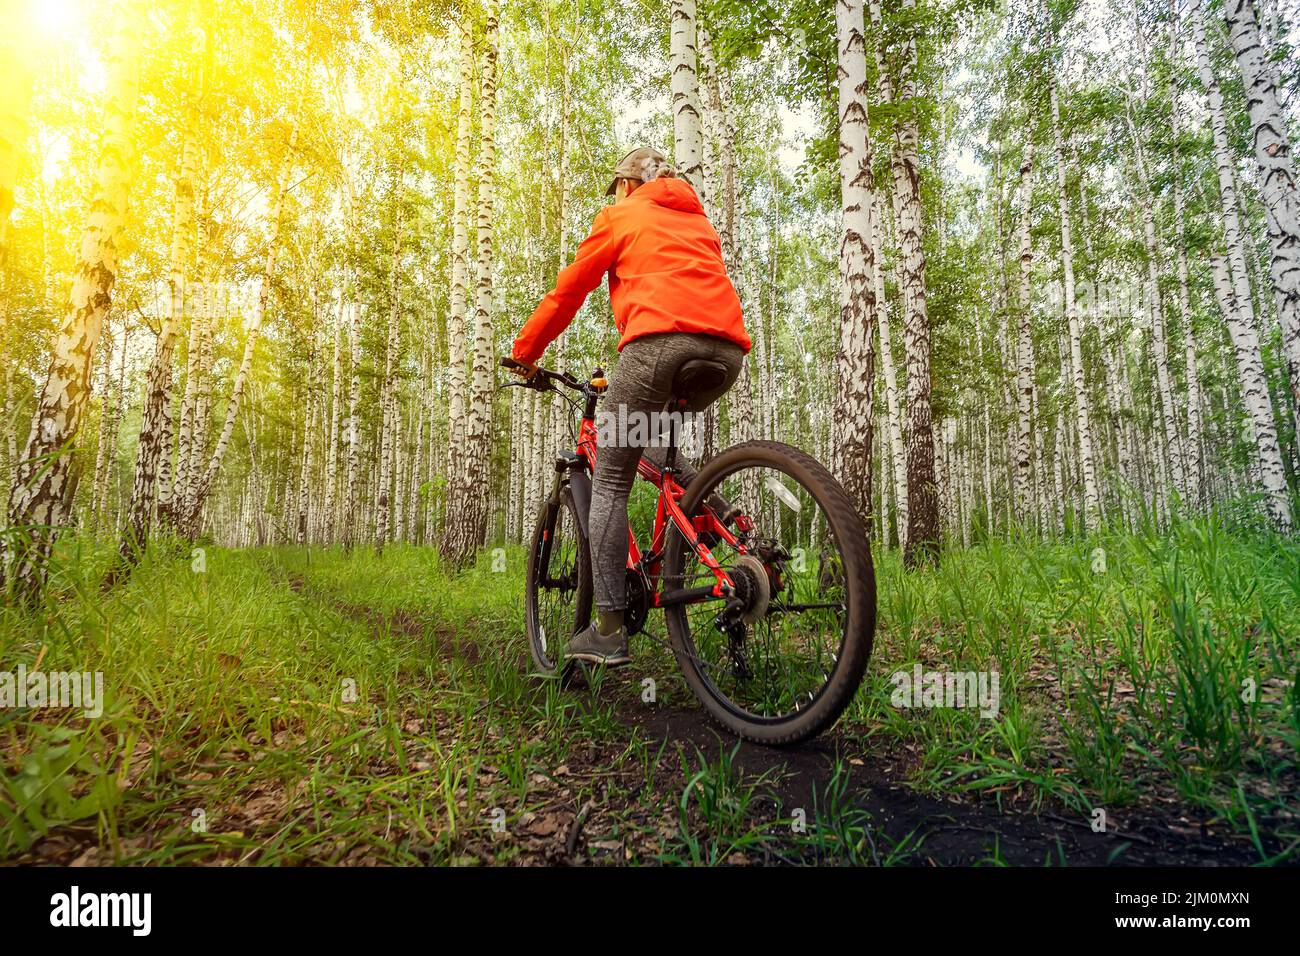 Woman in a bright orange jacket riding bike on mountain top forest trail Stock Photo